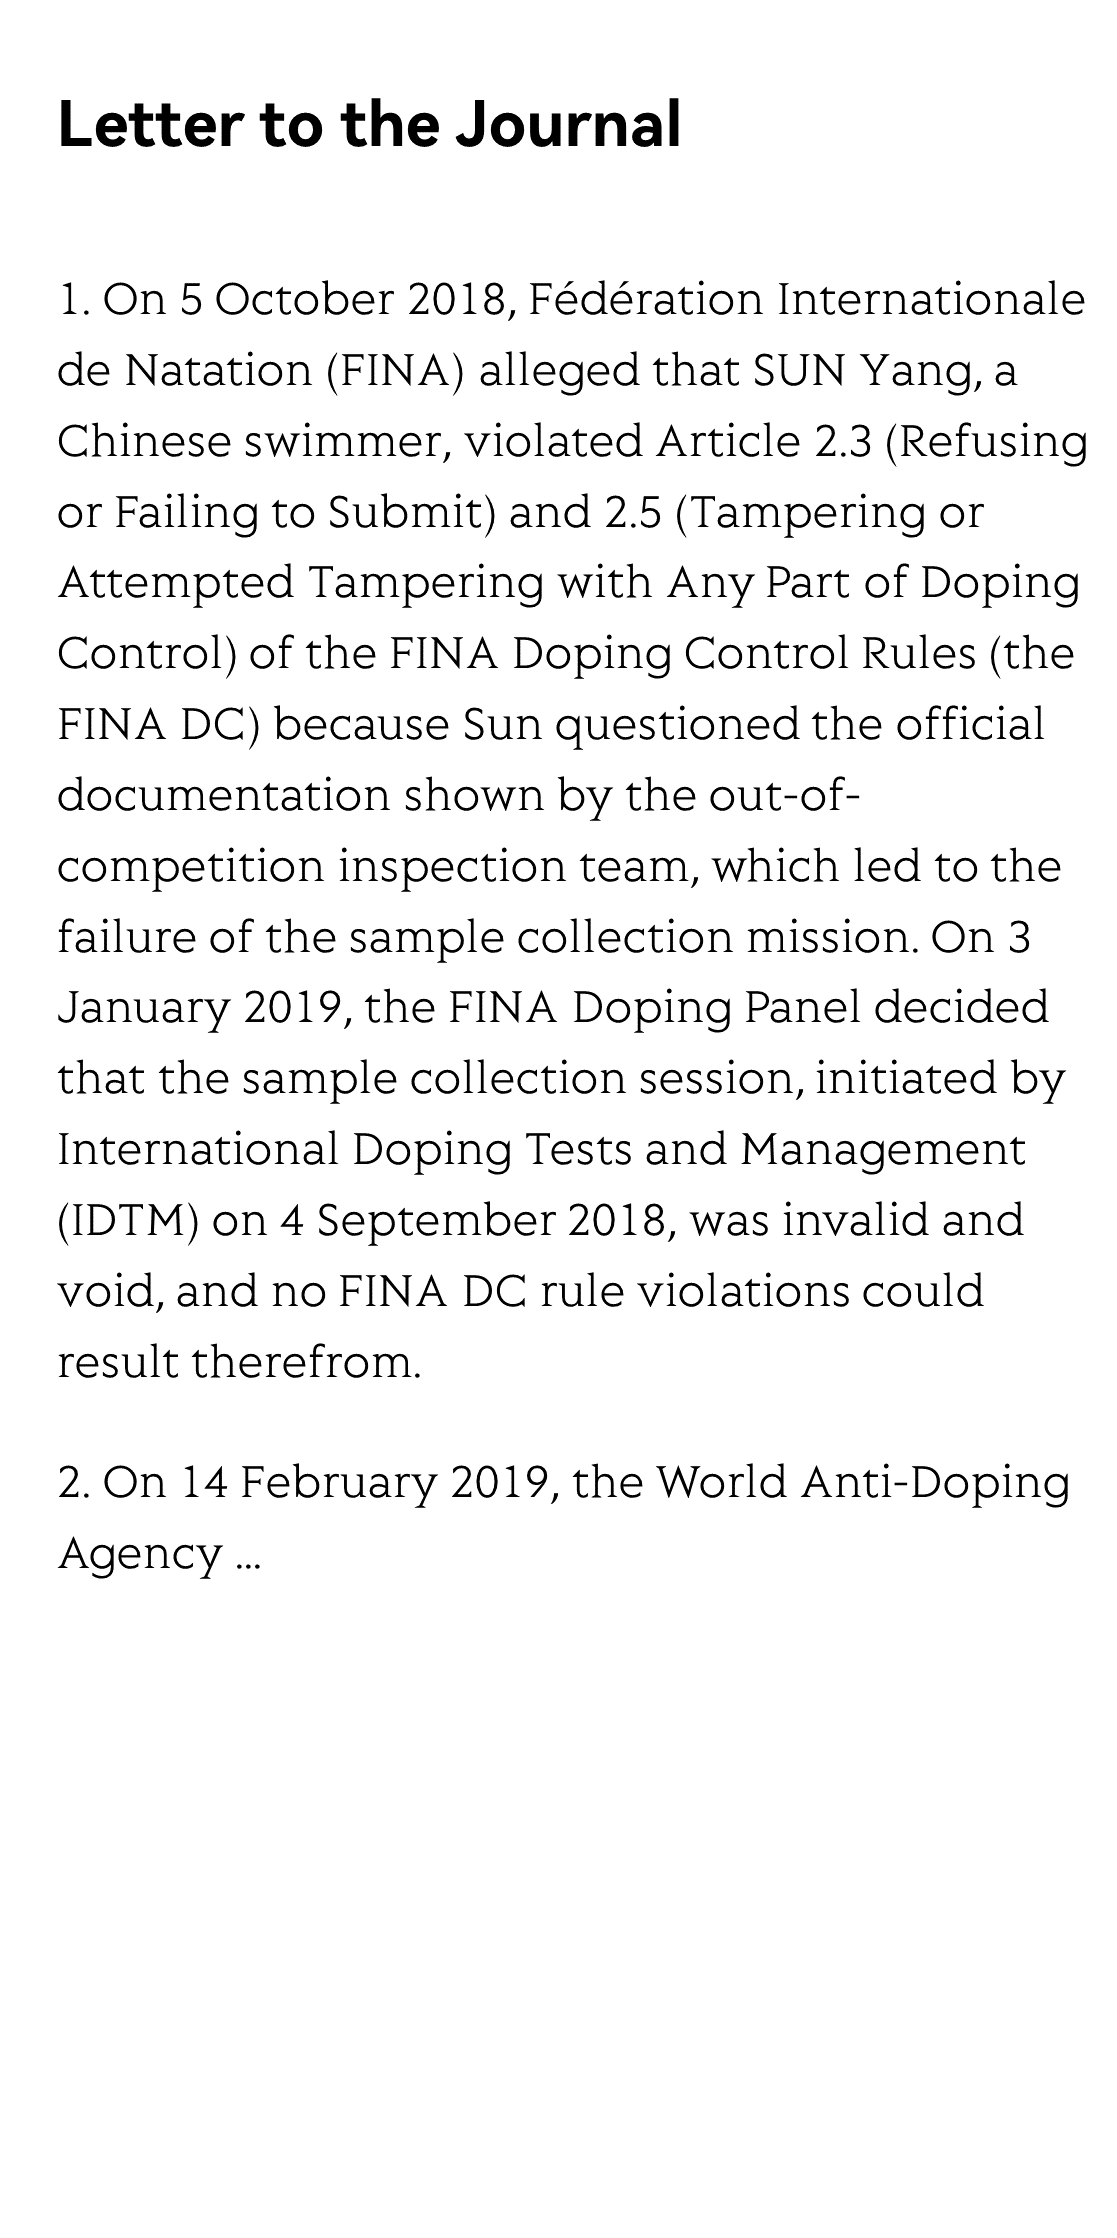 The Swiss Federal Tribunal Annulled the Arbitral Award in the SUN Yang v. WADA & FINA Case: The Applicant's Duty of Curiosity on the Qualifications of an Arbitrator and the Neutrality of the Arbitrator_2